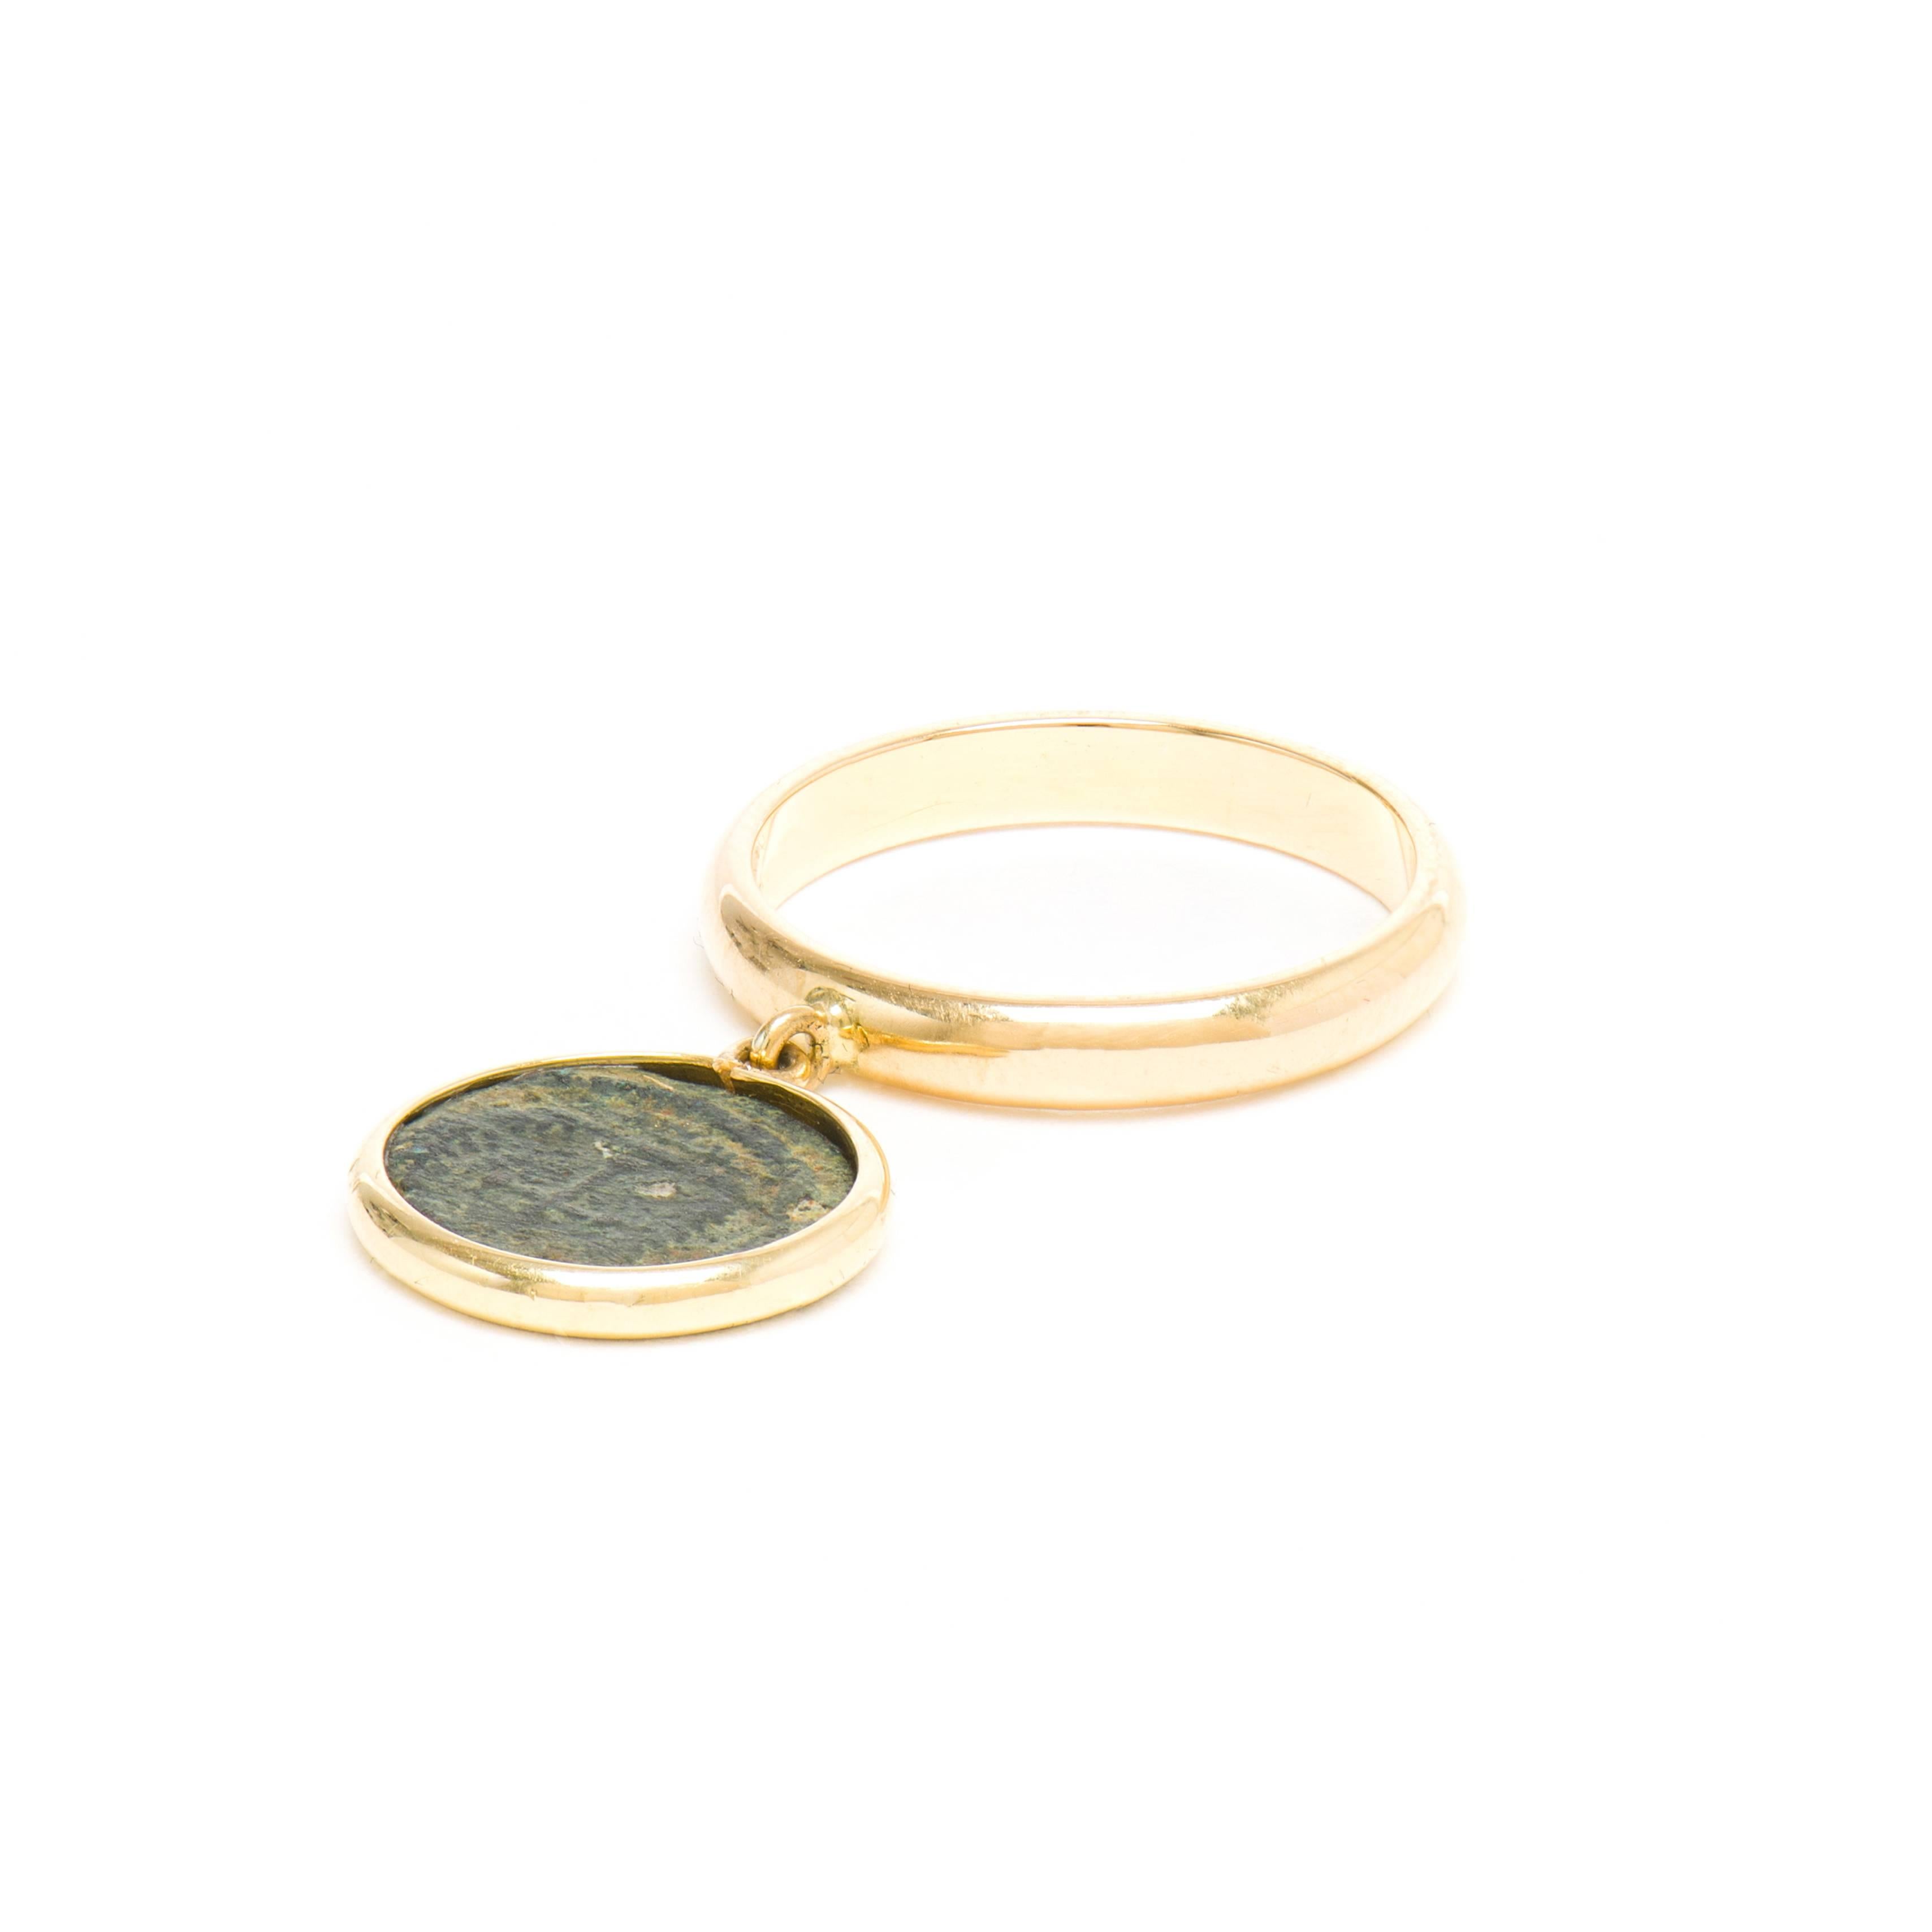 This DUBINI coin ring from the 'Empires' collection features an authentic Roman bronze coin set in 18K yellow gold.

Made to order with a lead time of 2-3 weeks.

* Due to the unique process of hand carving coins in ancient times, there may be a few